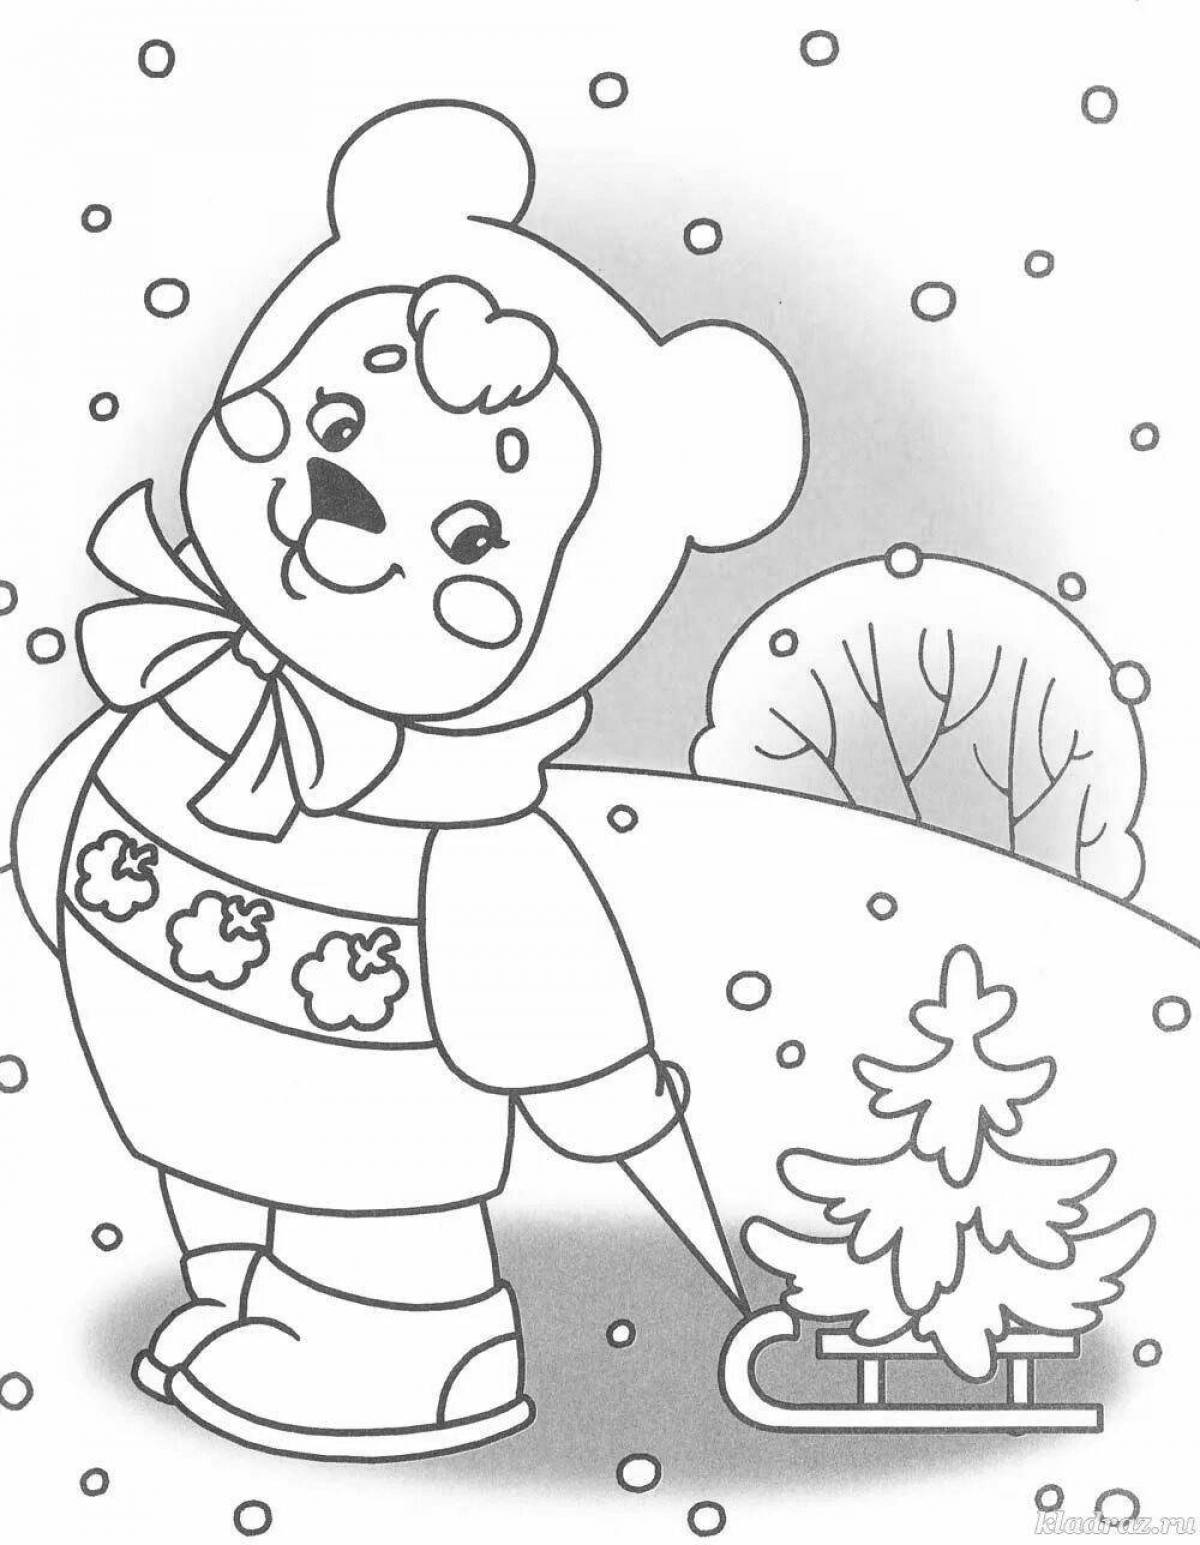 Colorific winter coloring page for children 3-4 years old